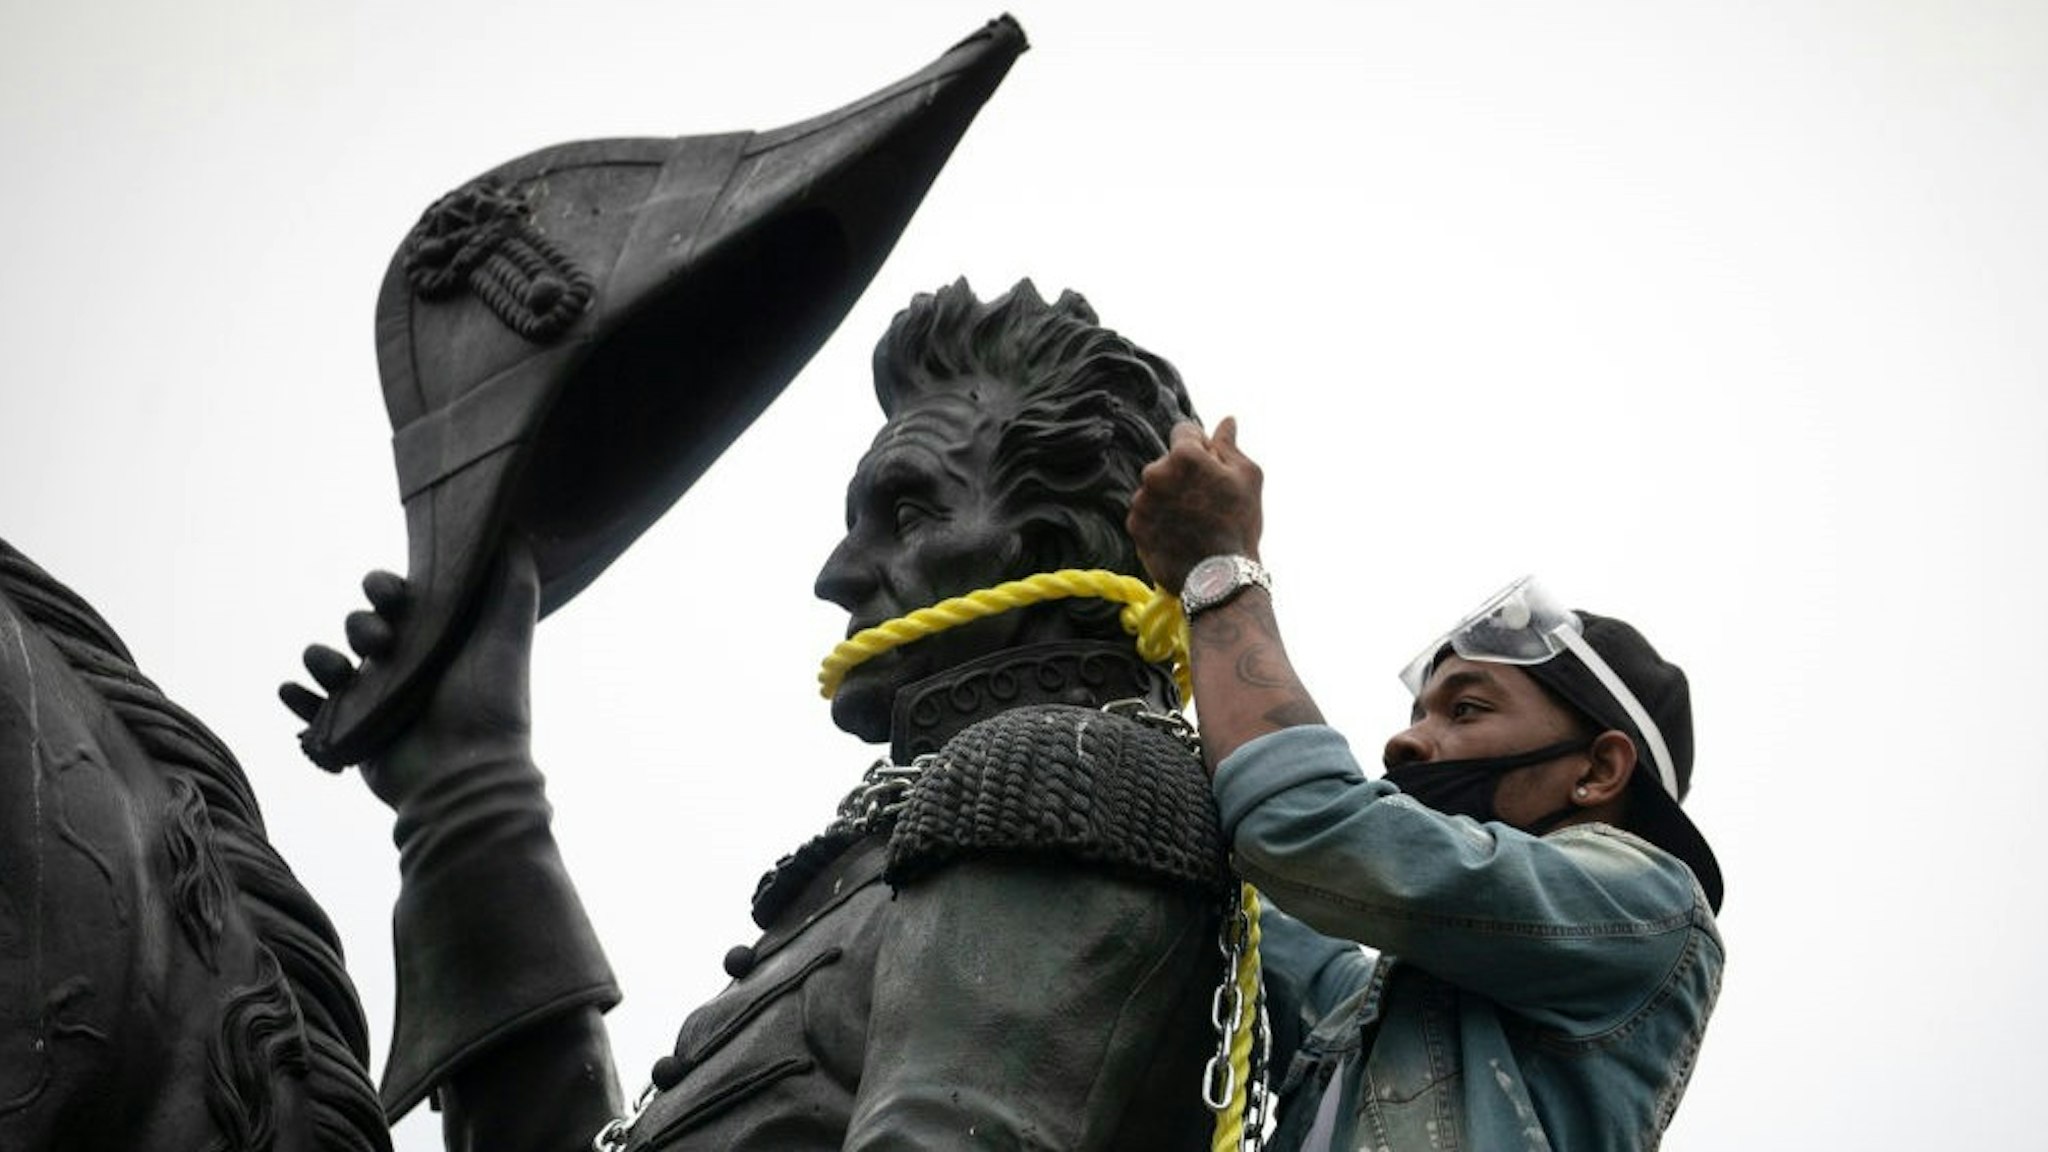 WASHINGTON, DC - JUNE 22: Protesters attempt to pull down the statue of Andrew Jackson in Lafayette Square near the White House on June 22, 2020 in Washington, DC. Protests continue around the country over the deaths of African Americans while in police custody. (Photo by